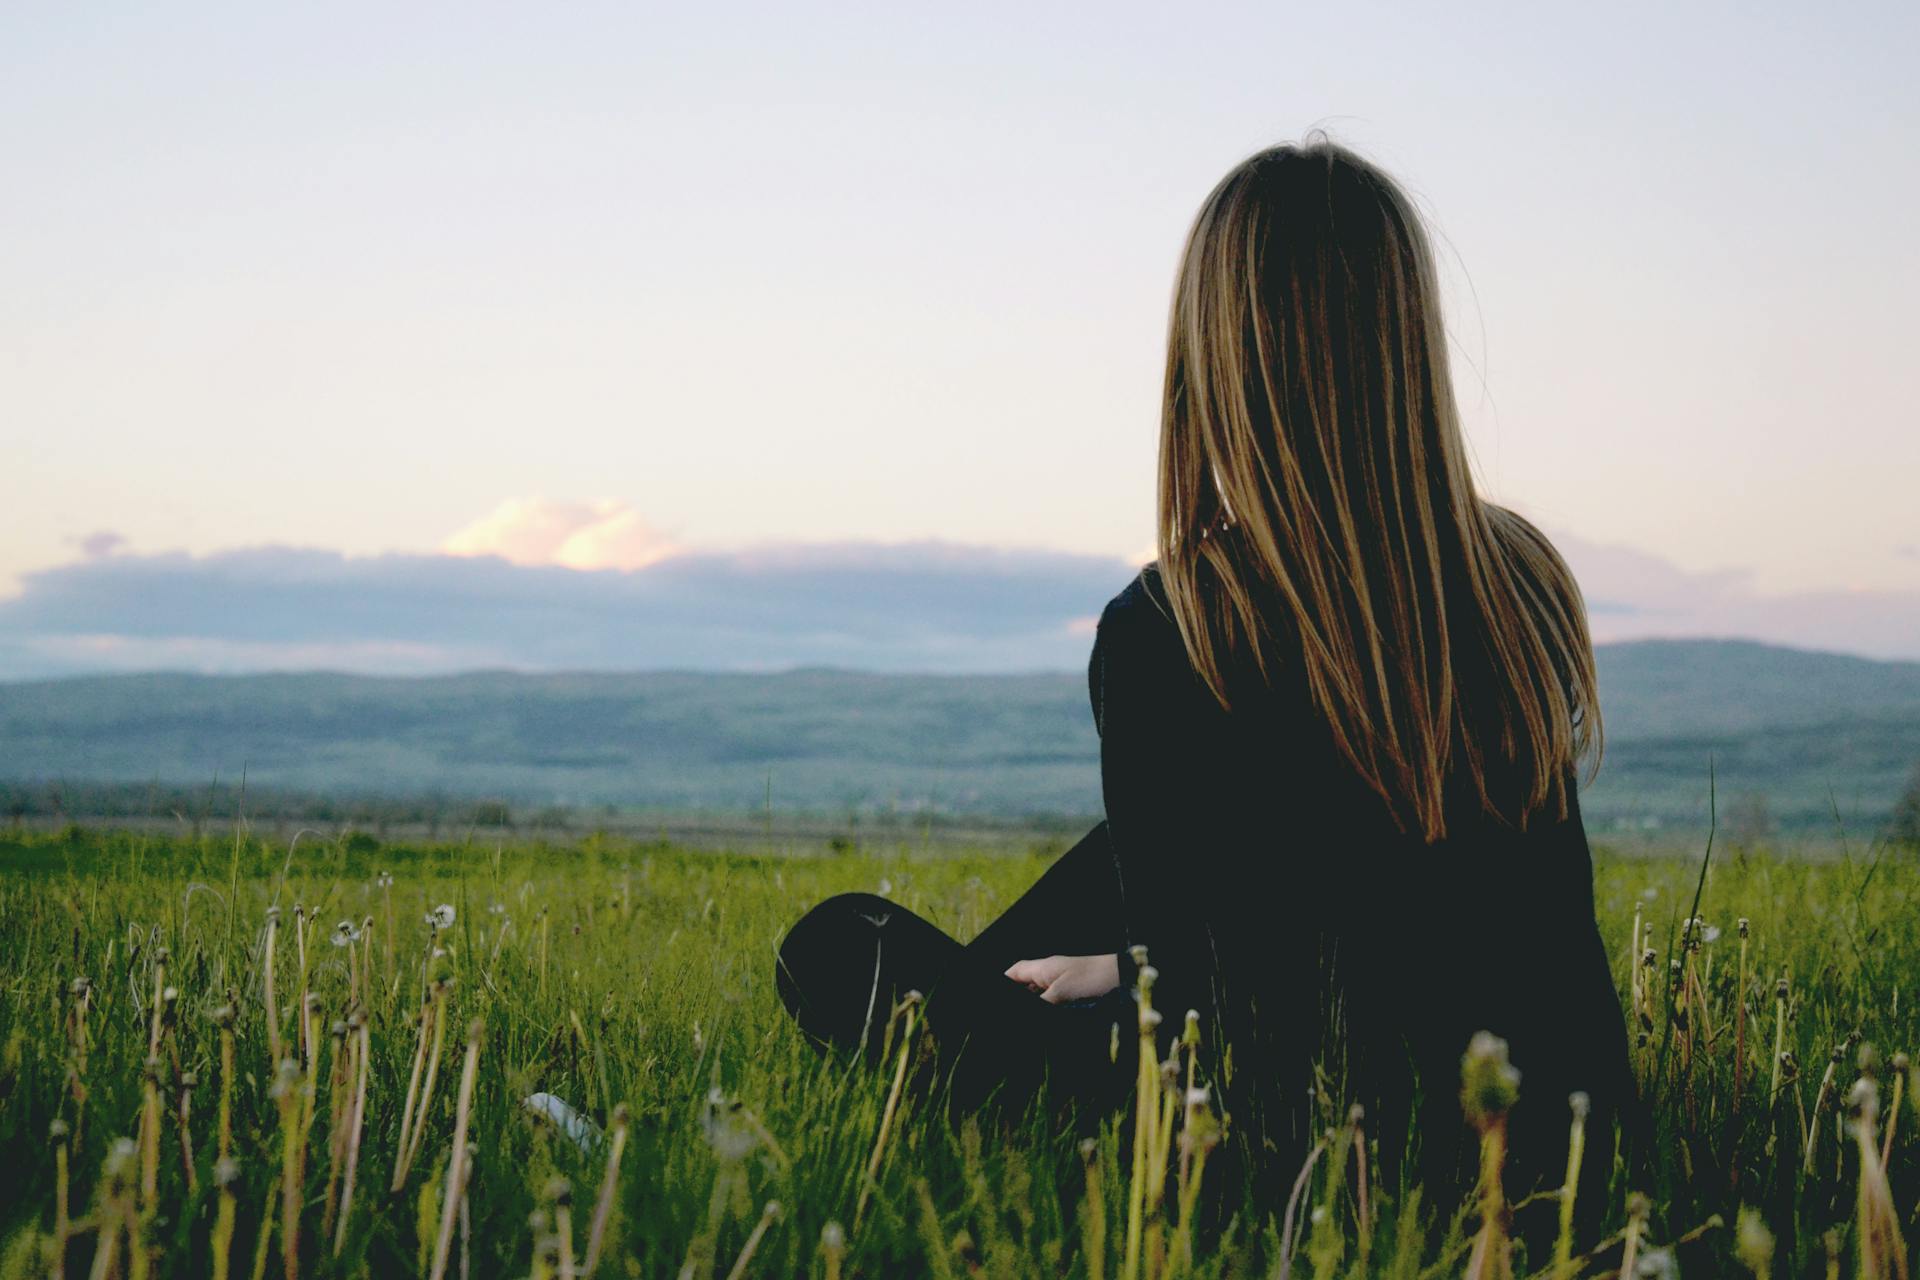 A woman sitting on a grassy field | Source: Pexels